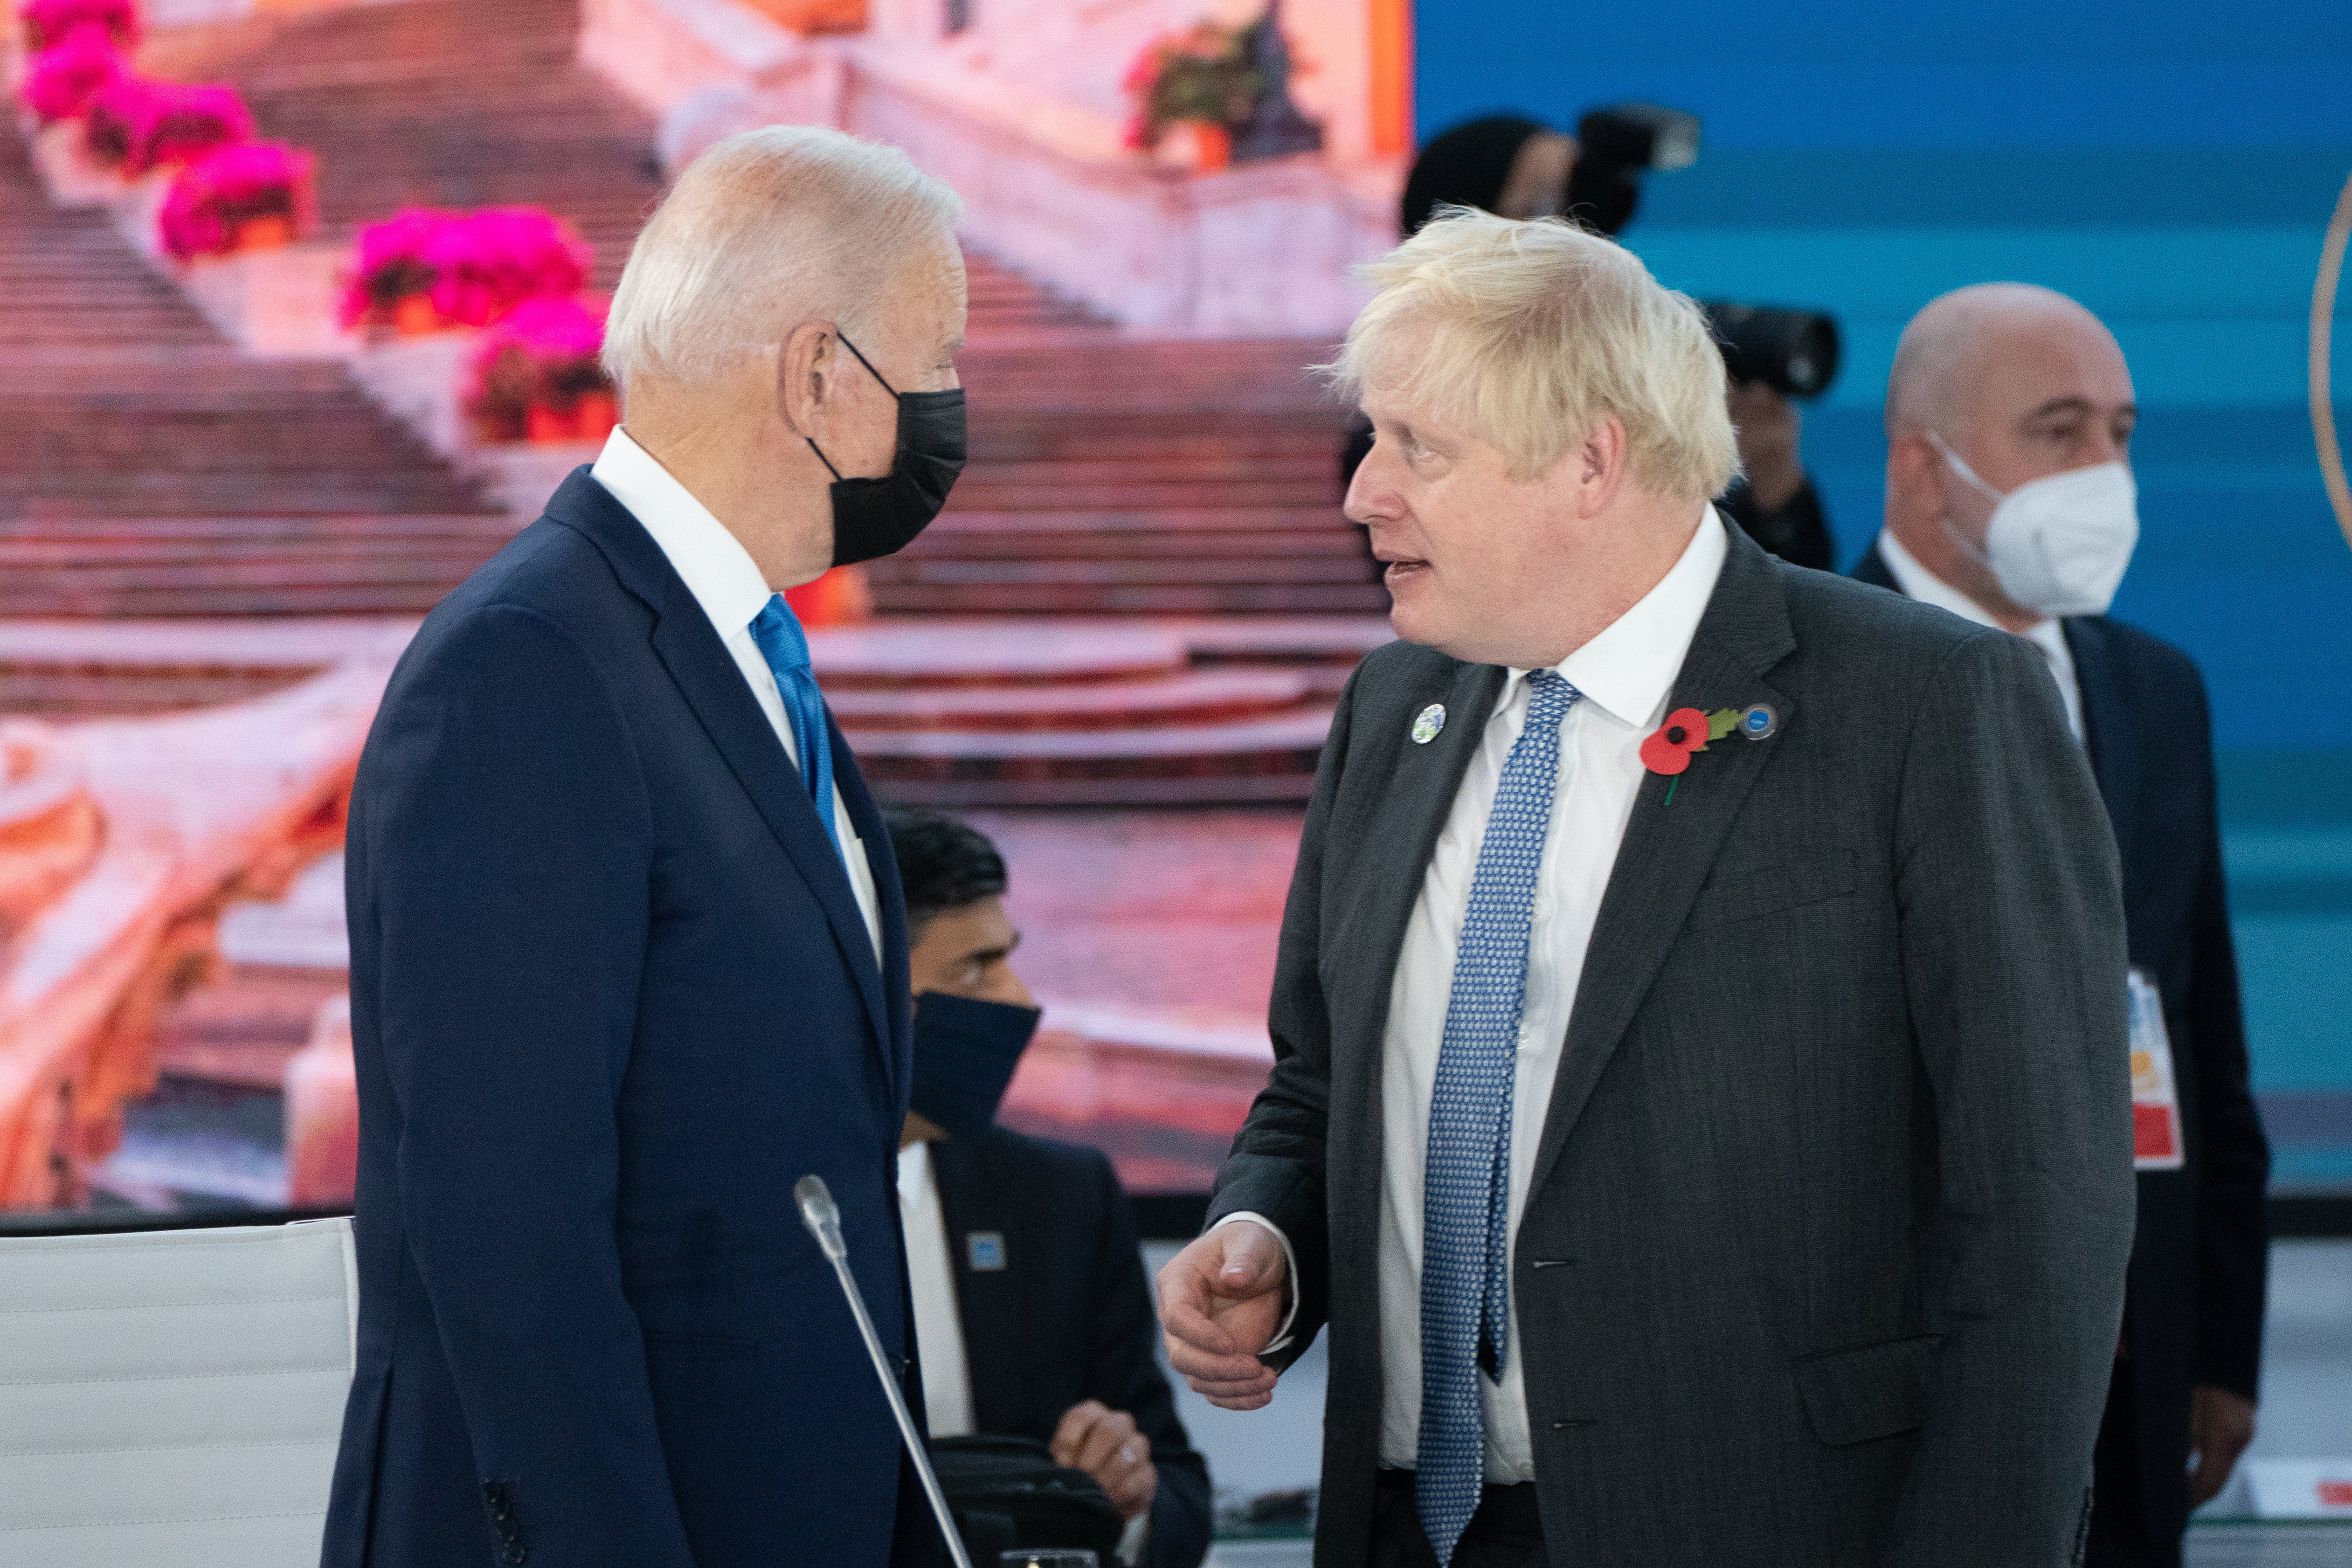 US President Joe Biden, pictured with Boris Johnson during the G20 summit in Rome, has looked to resolve trade disputes since coming to office (Stefan Rousseau/PA)